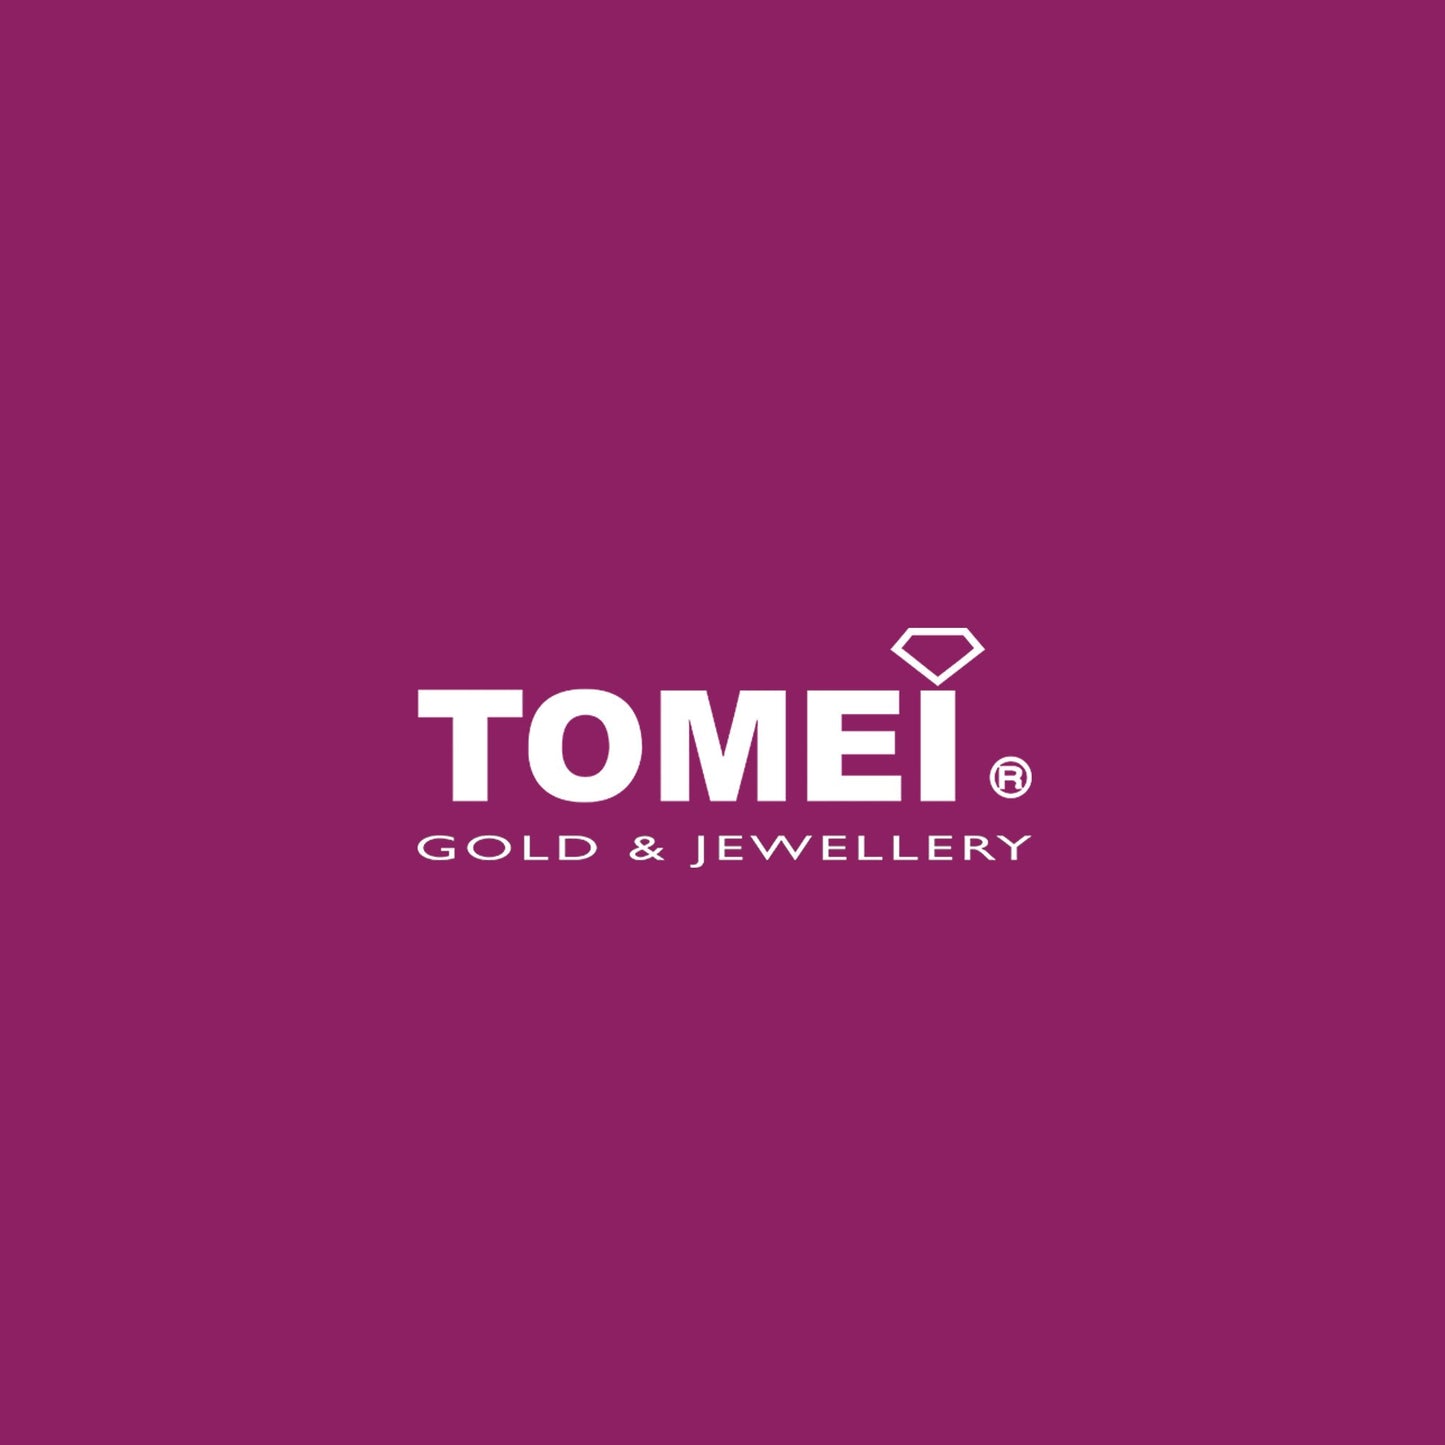 TOMEI Crab Abacus Pendant, Yellow Gold 916